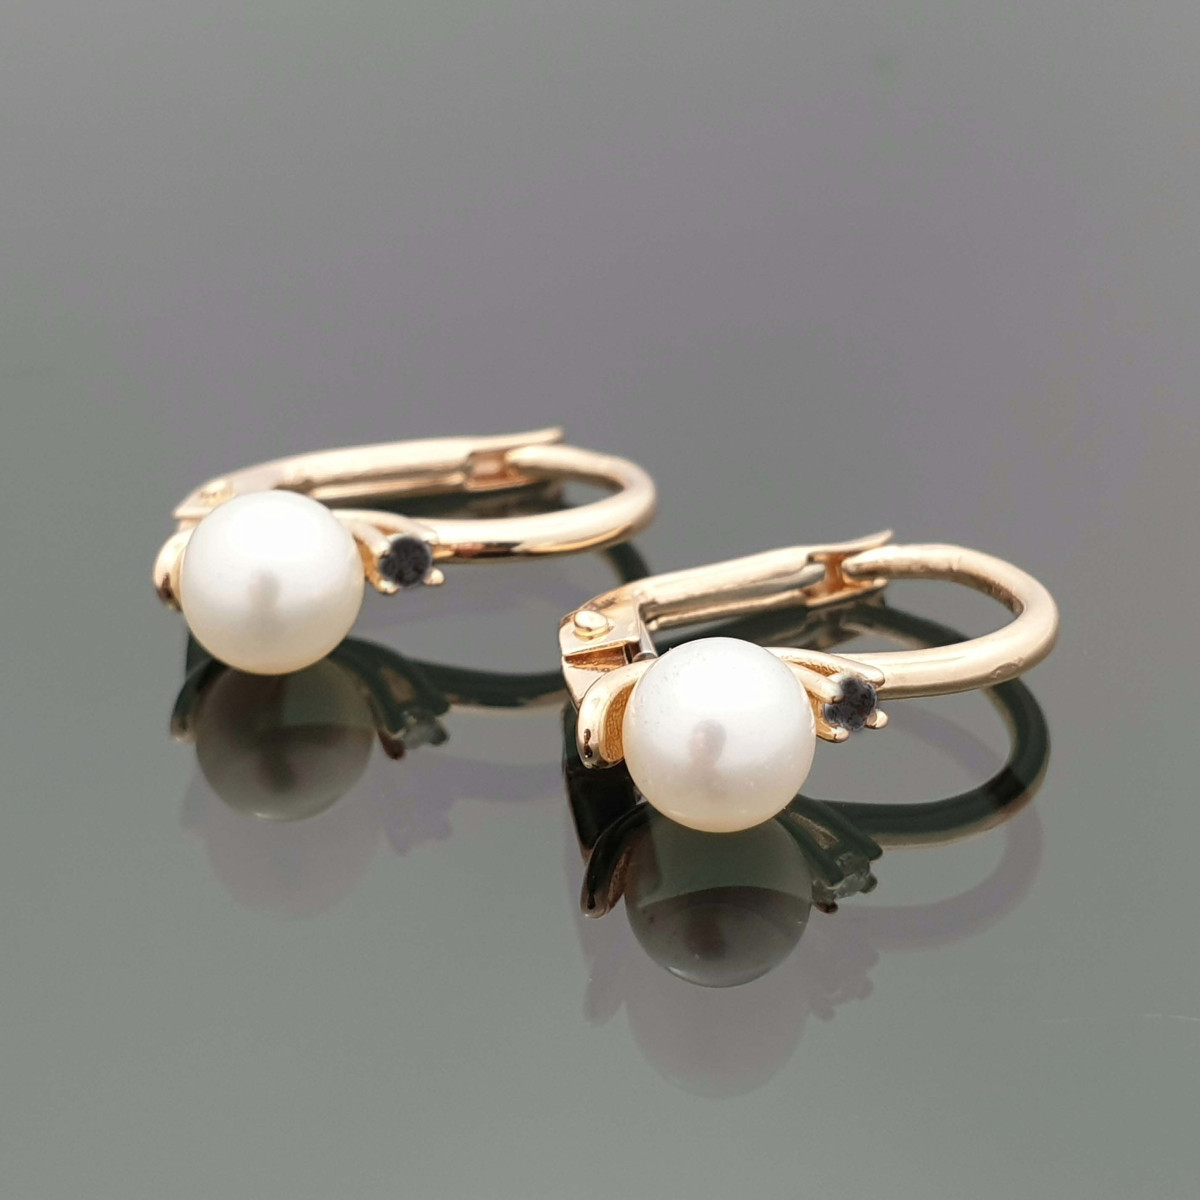  Gold earrings with pearls (1093)